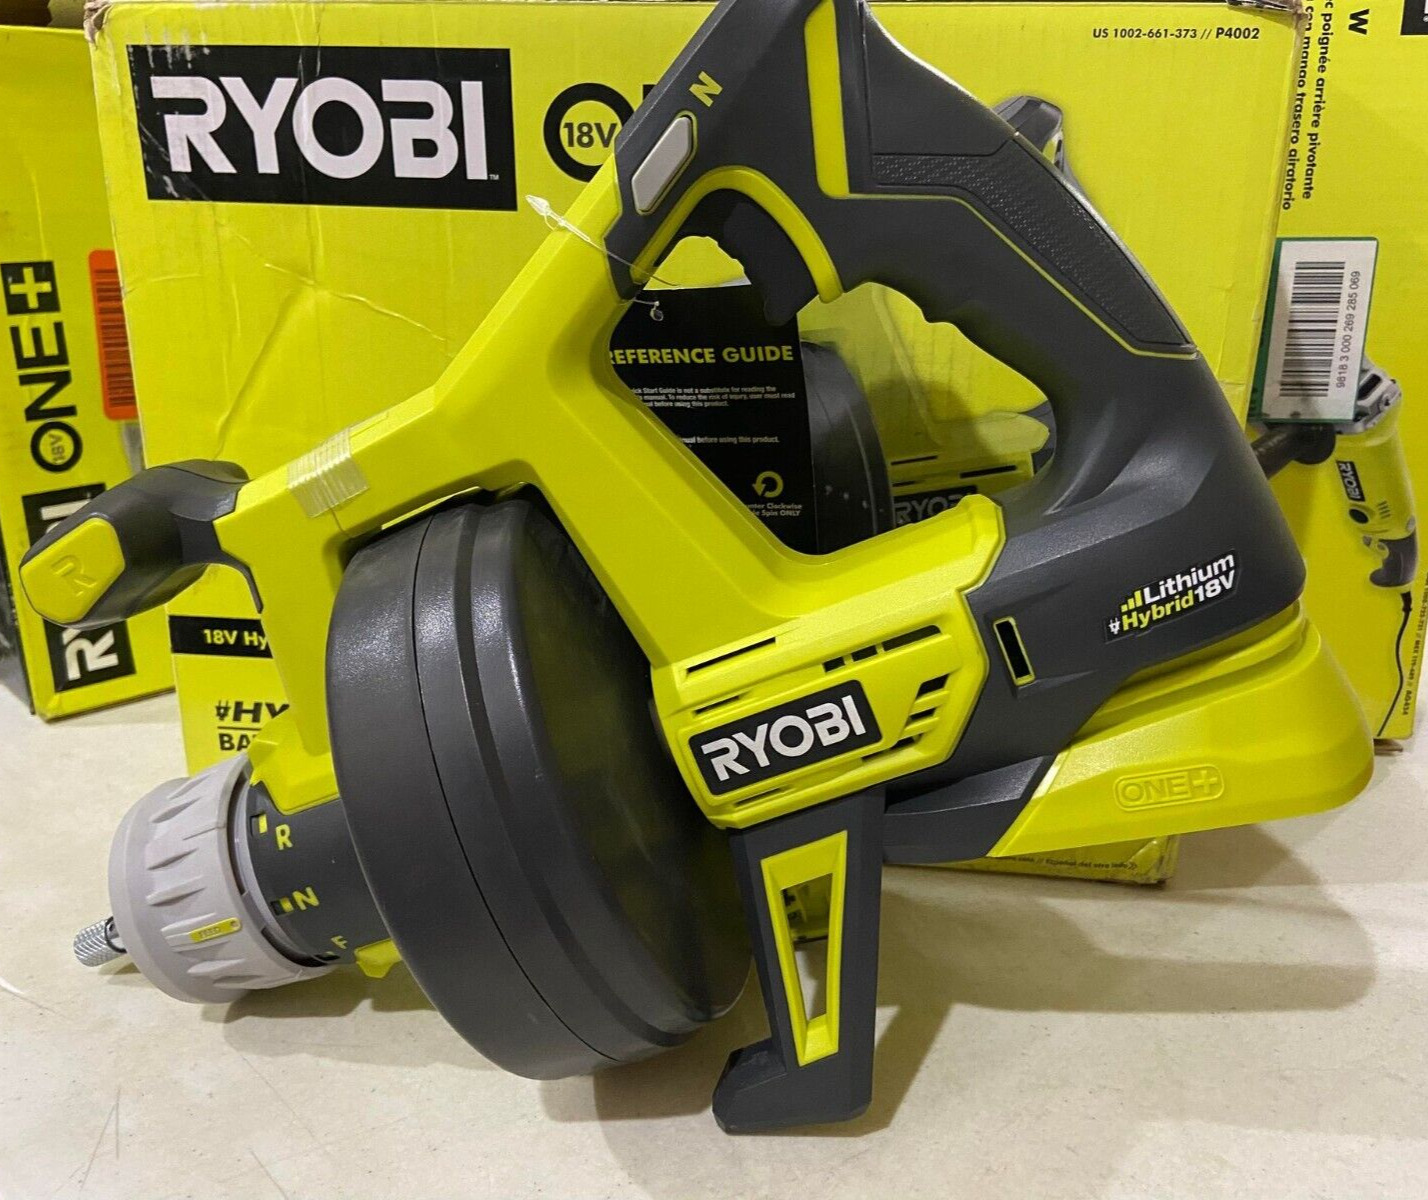 USED Ryobi P4002 ONE+ 18v Hybrid Drain Auger (tool only) READ